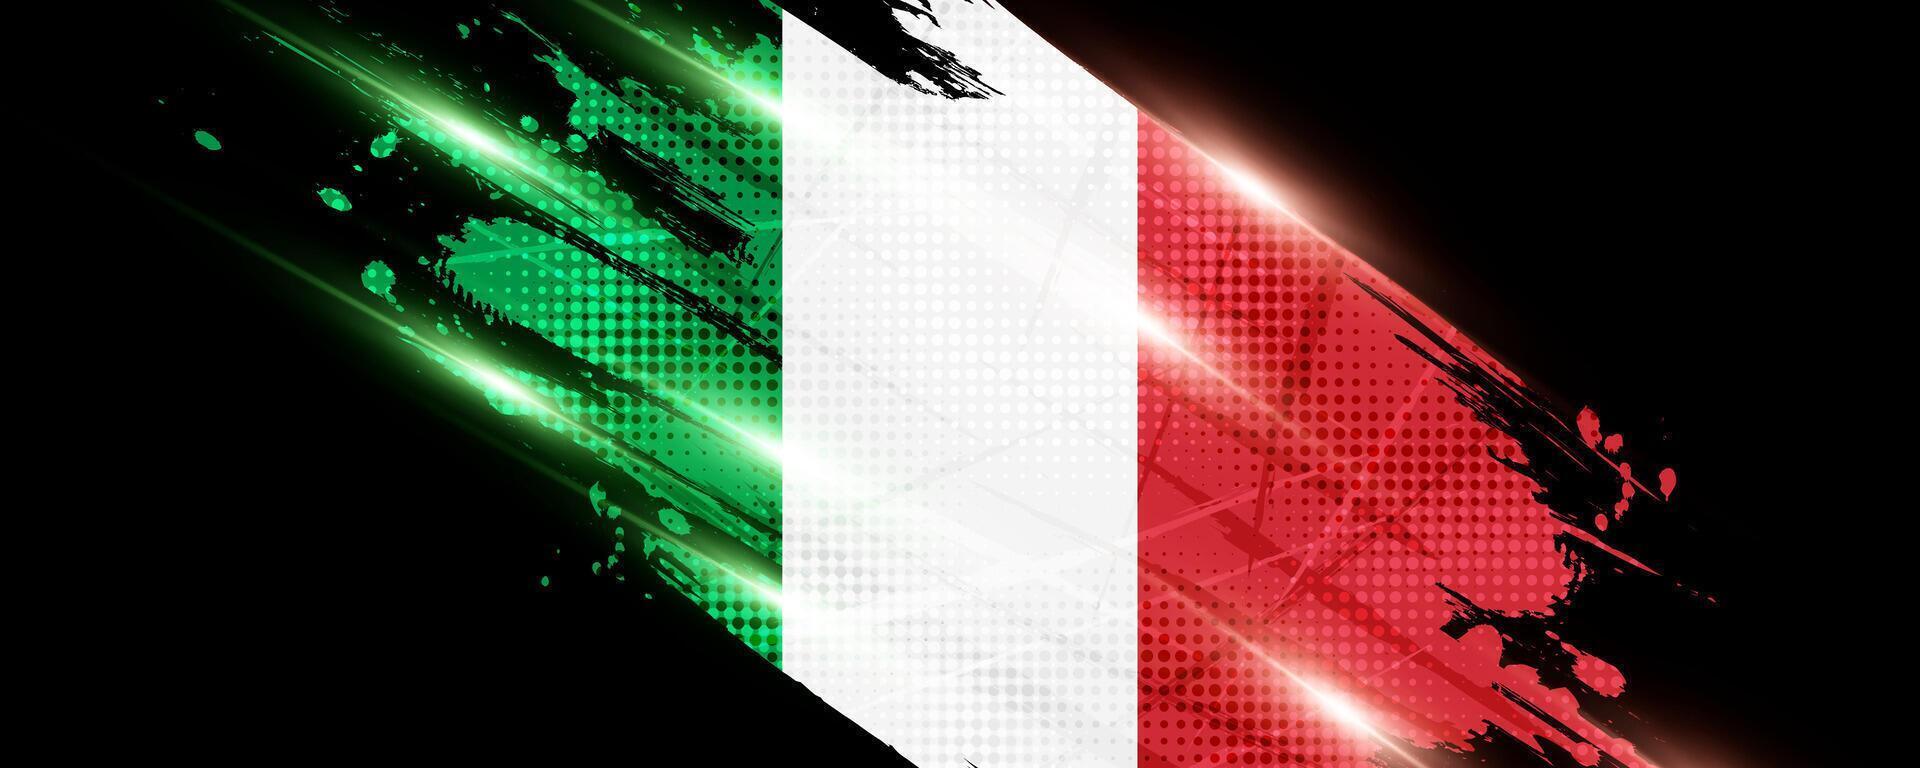 Italy Flag in Brush Paint Style with Halftone Effect. National Flag of Italy with Grunge Brush Concept vector